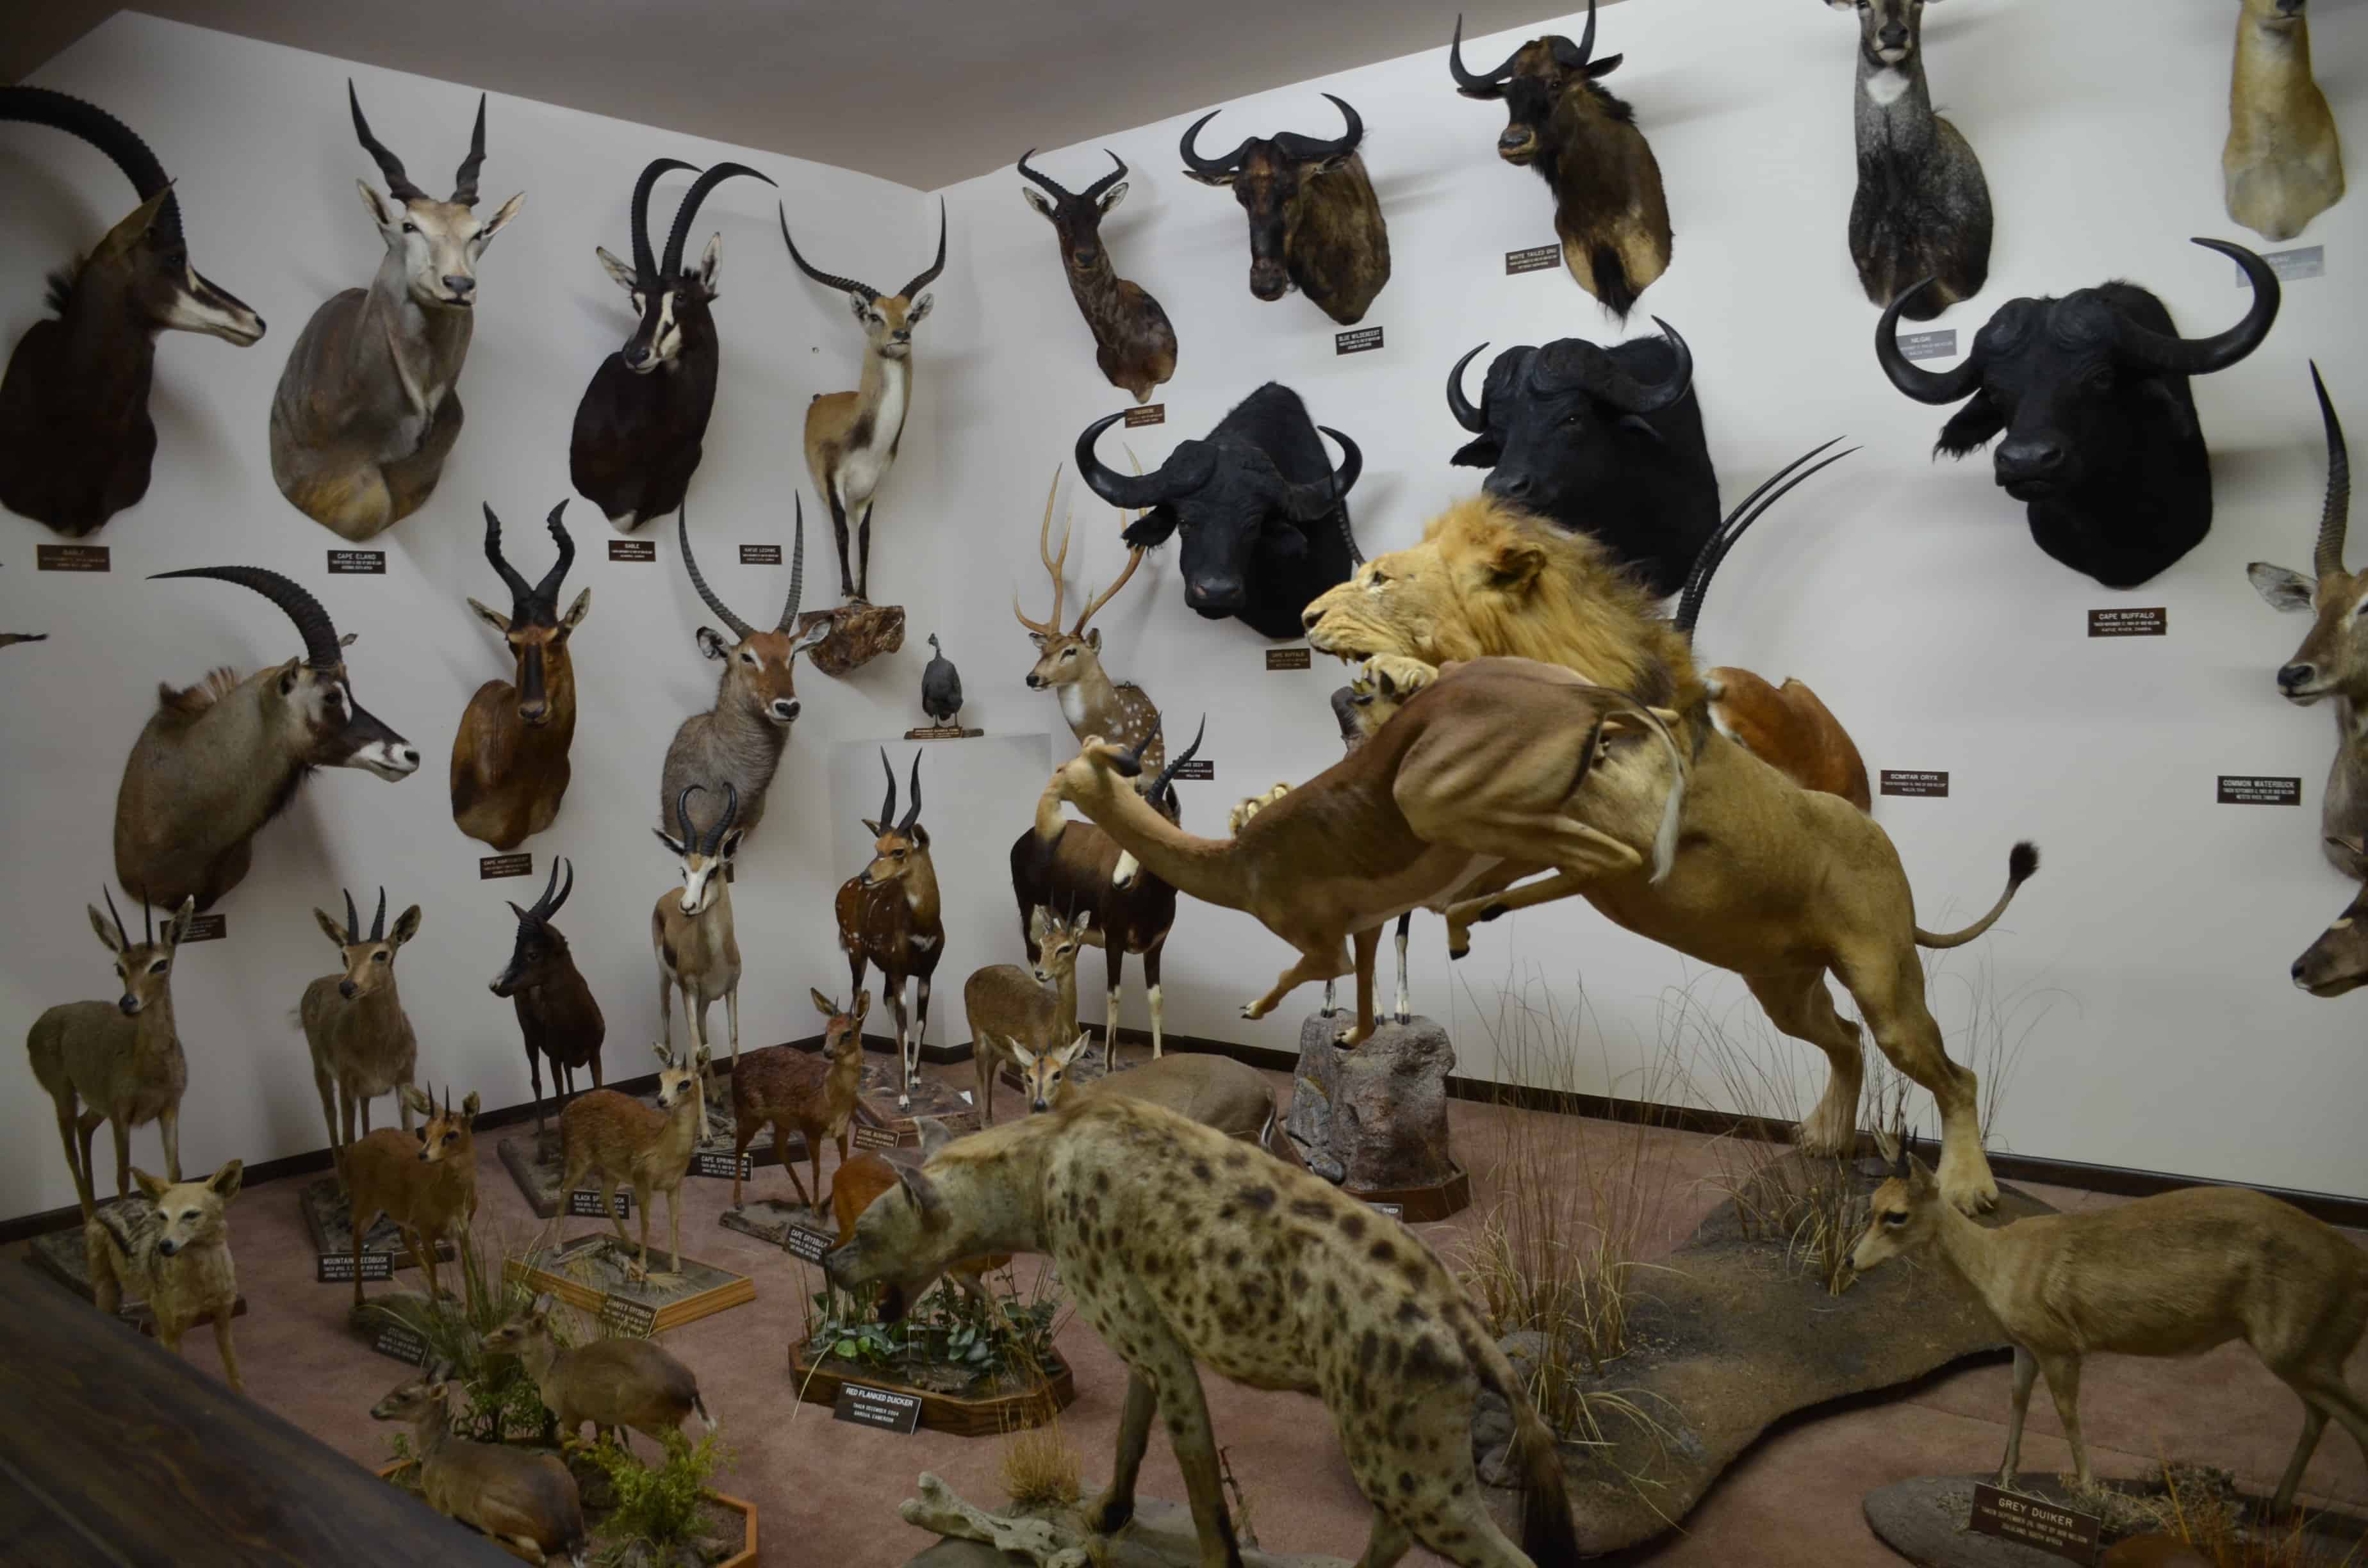 African animals at the Nelson Museum of the West in Cheyenne, Wyoming